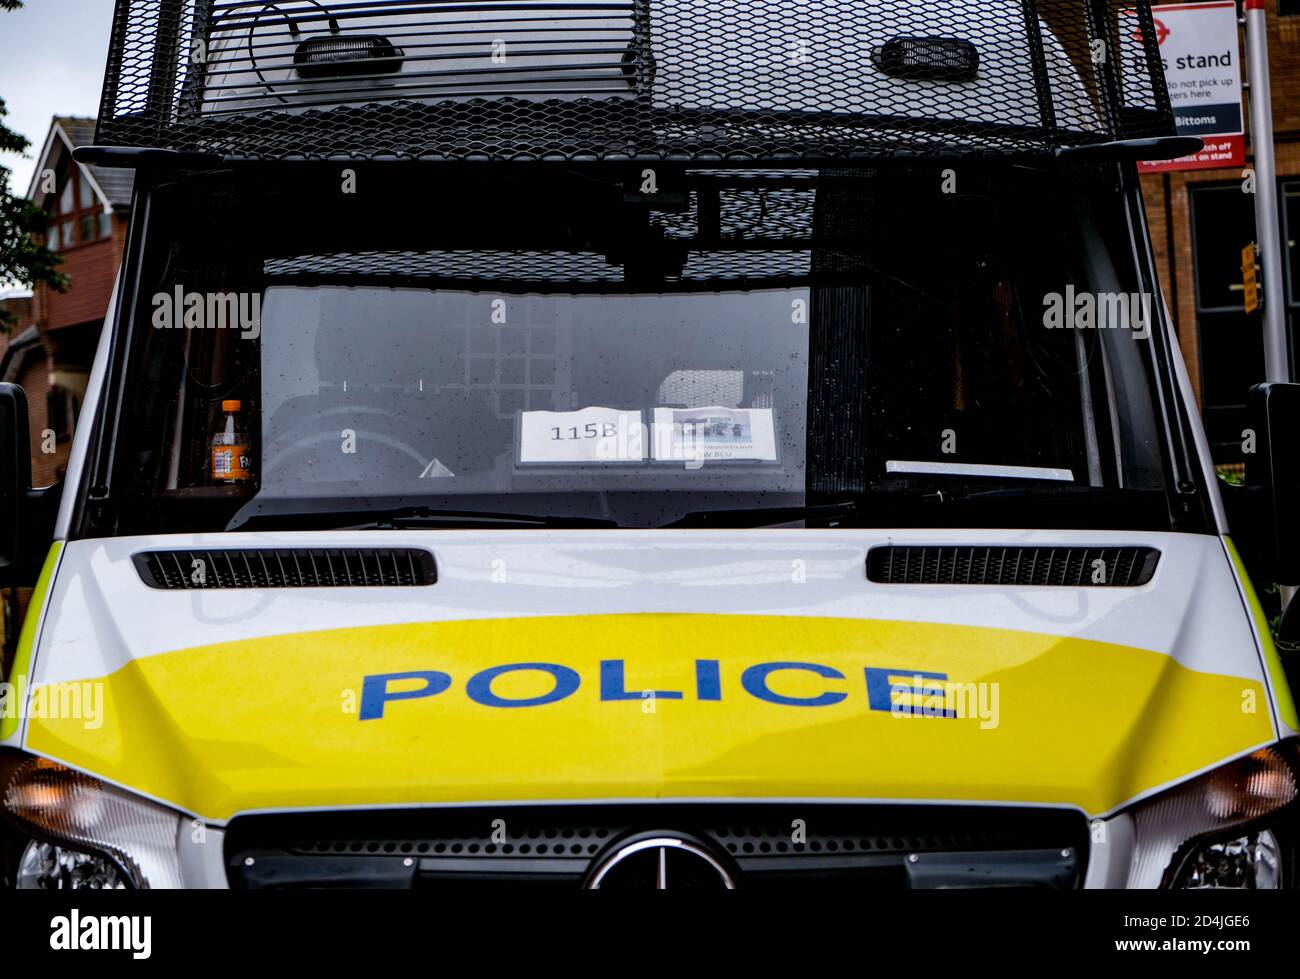 London UK October 09 2020, Parked Police Riot Control Van Or Vehicle To Coontrol Public Order Stock Photo